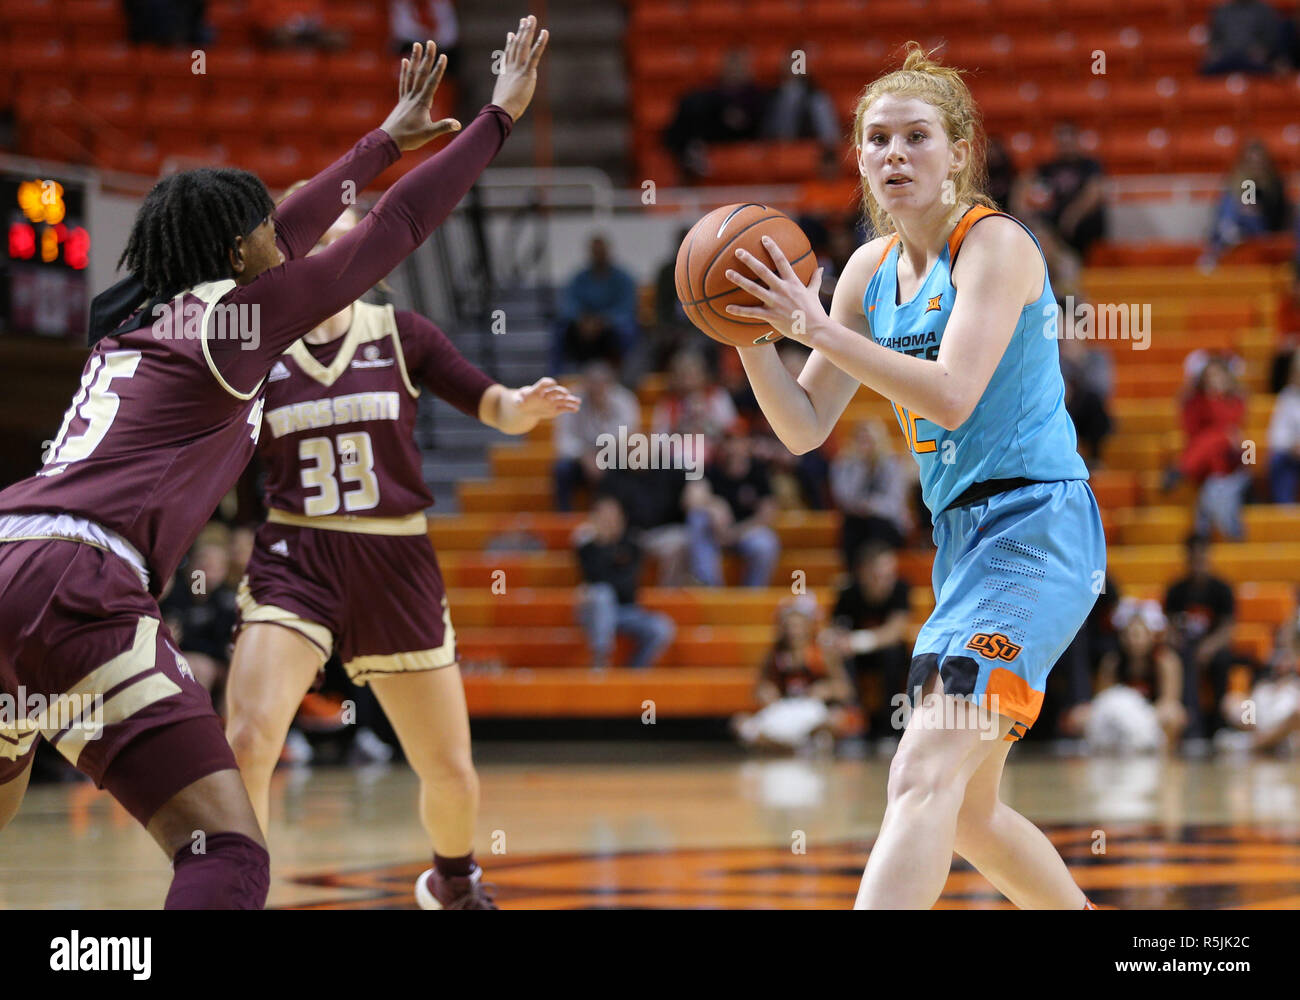 Stillwater, OK, USA. 30th Nov, 2018. Oklahoma State Forward Vivian Gray (12) looks for an open teammate during a basketball game between the Texas State Bobcats and Oklahoma State Cowgirls at Gallagher-Iba Arena in Stillwater, OK. Gray Siegel/CSM/Alamy Live News Stock Photo